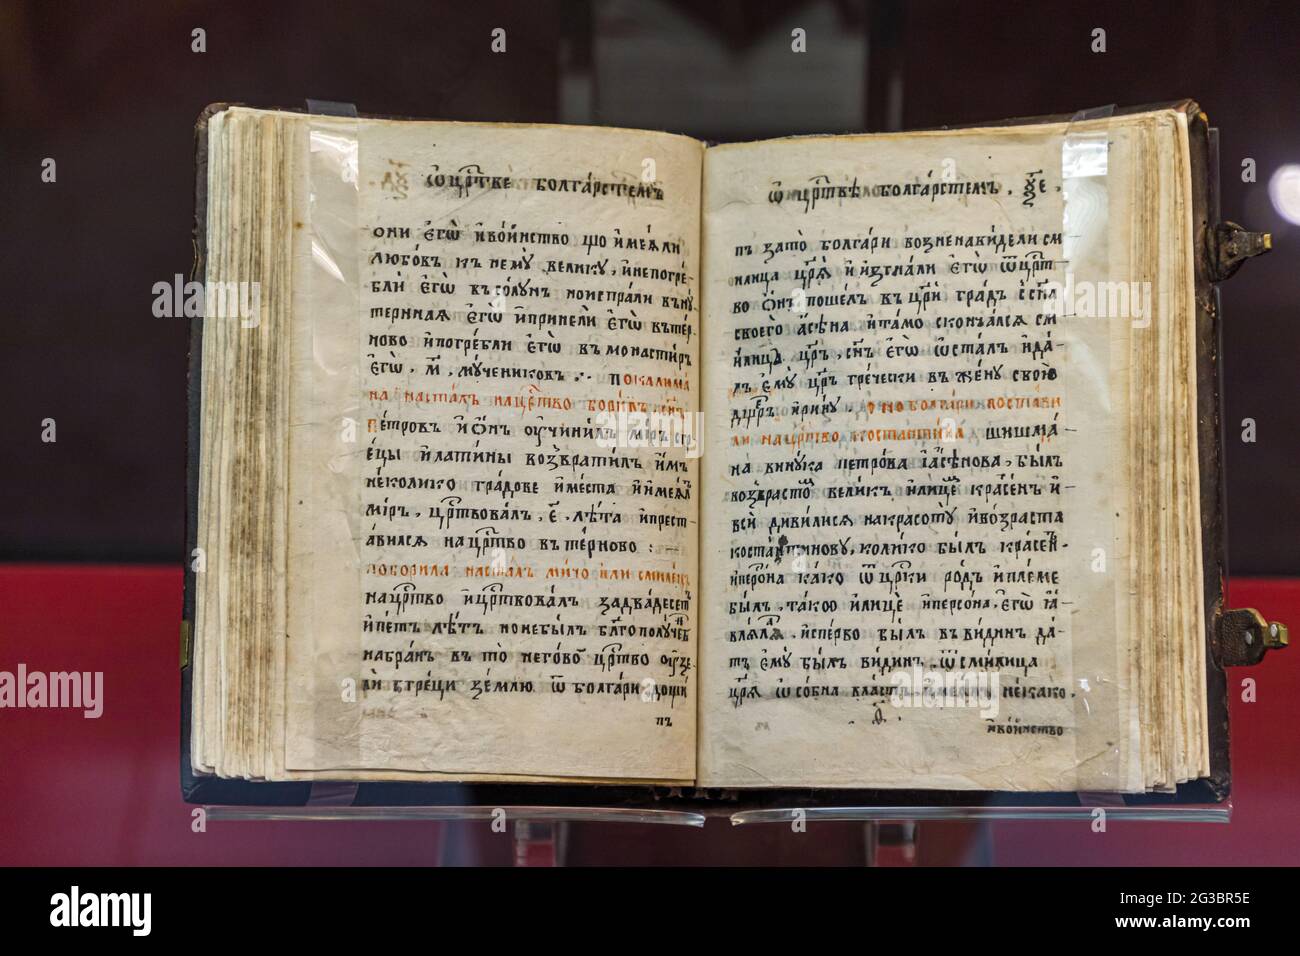 Book in National Historical Museum in Sofia, Bulgaria Stock Photo